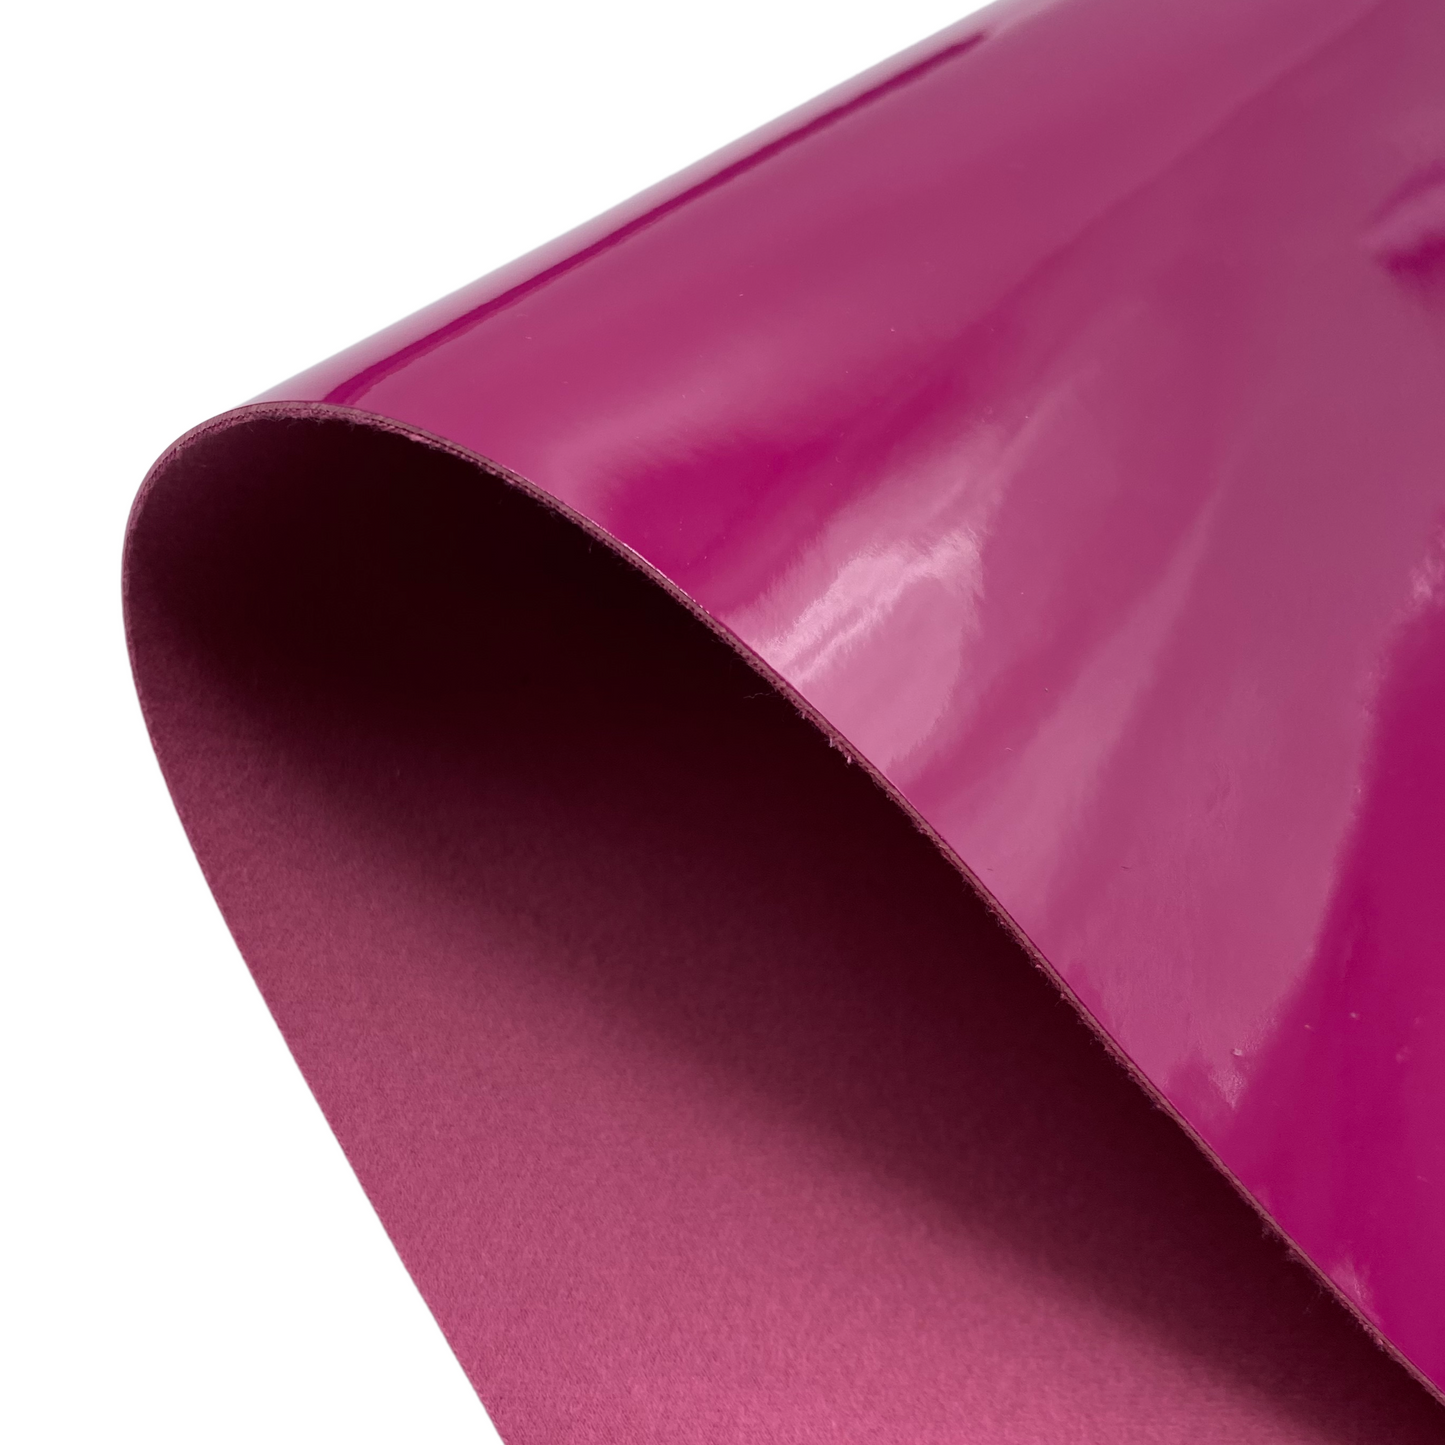 PURPLES Glossy Fabric Sheets - Pretty in Pink Supply